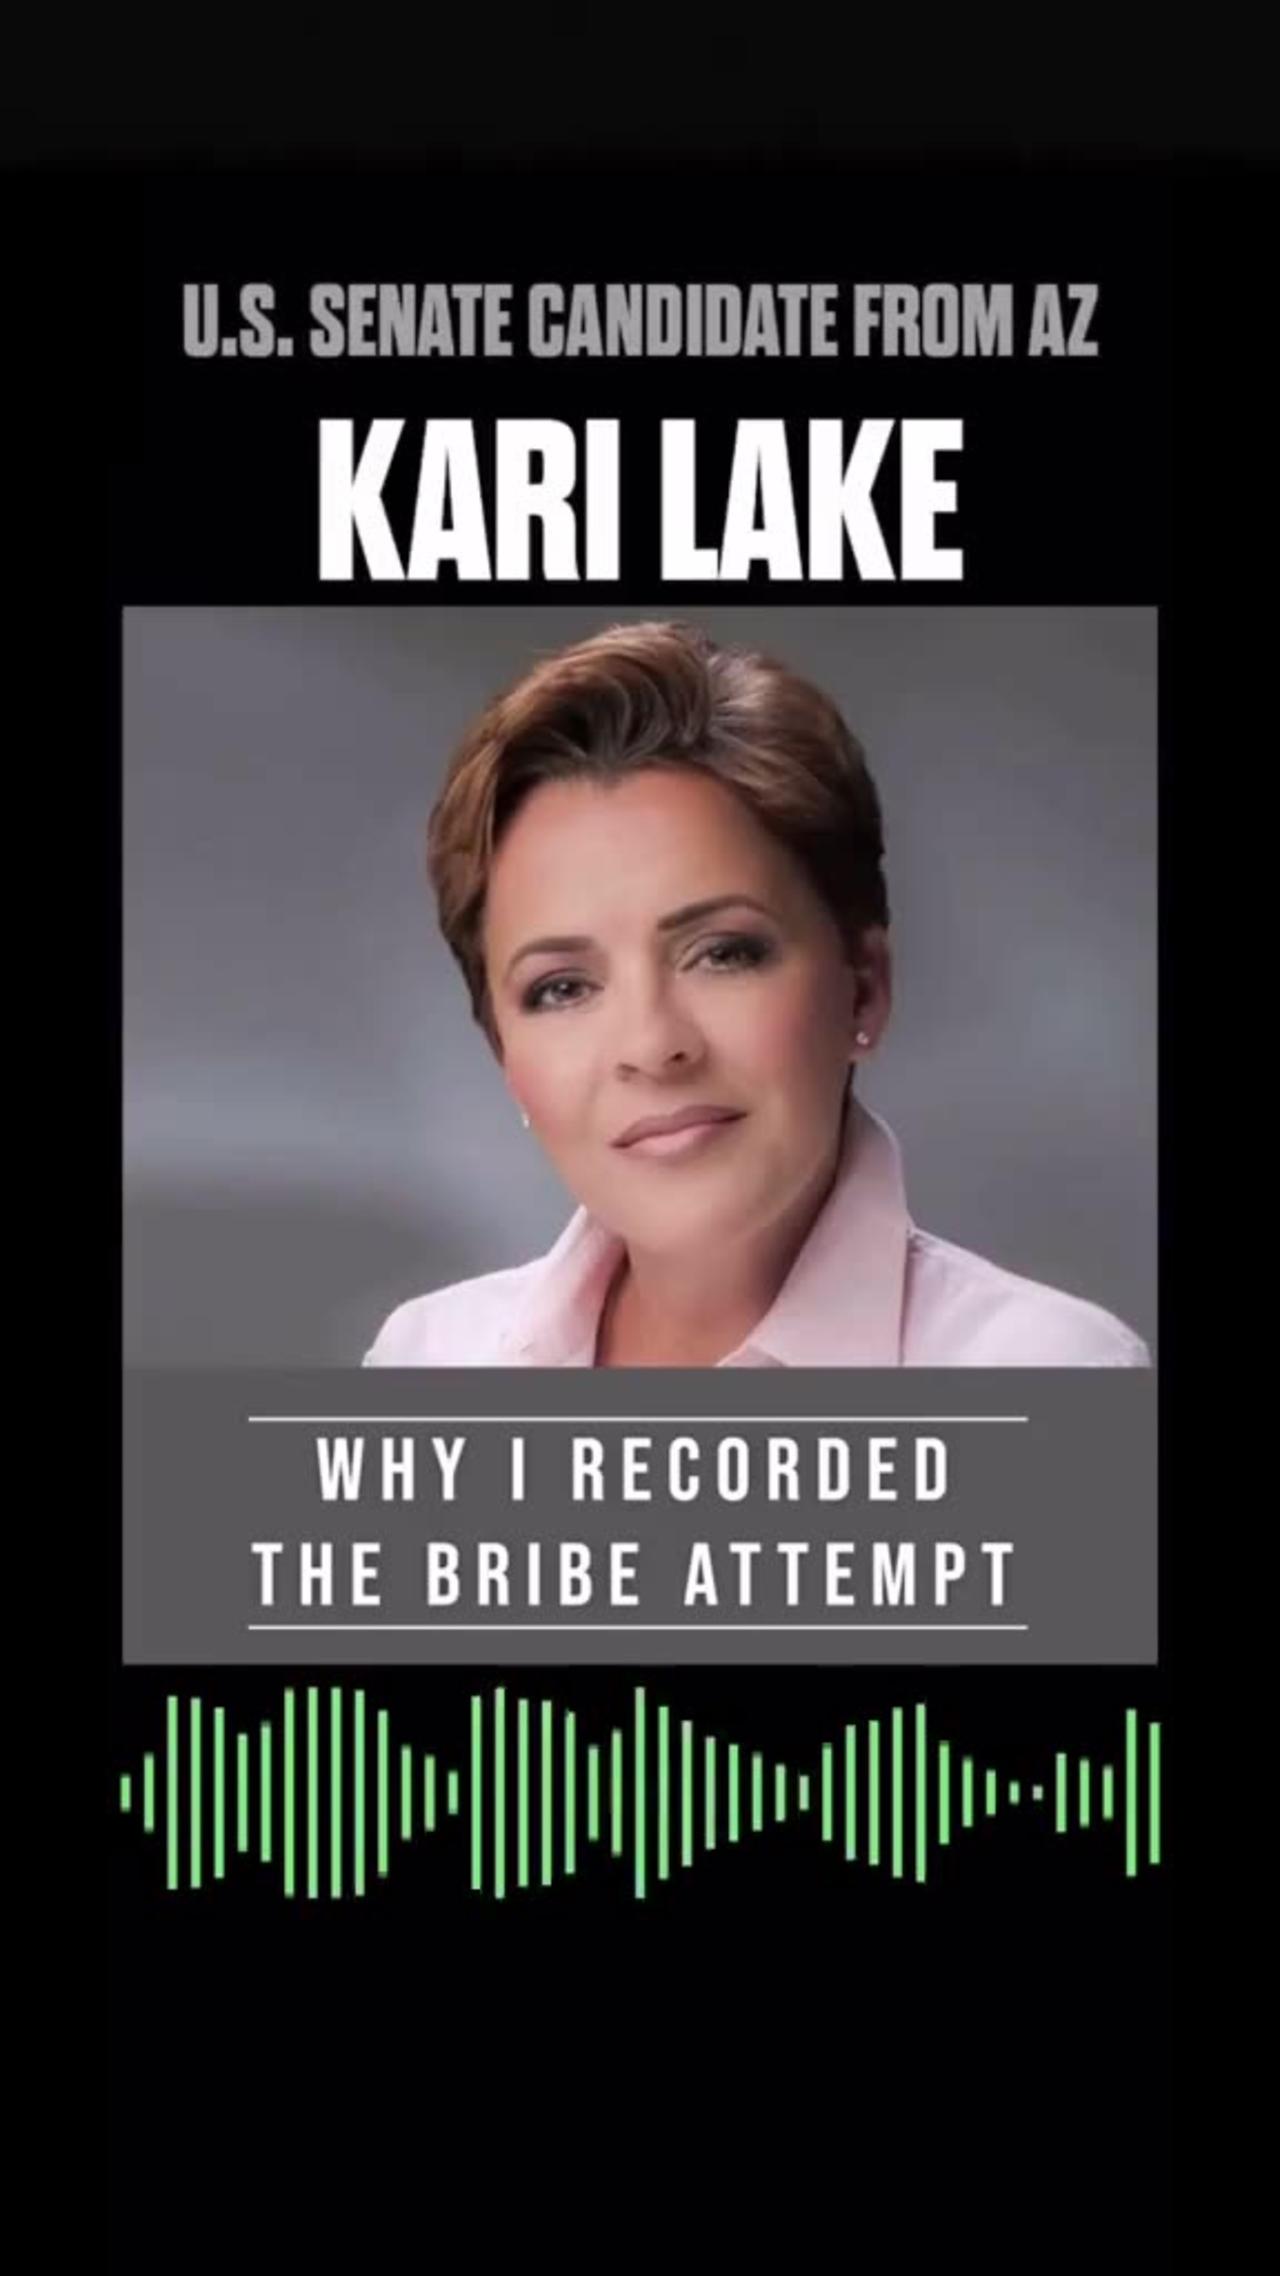 Kari Lake: Why I recorded and came forward with the bribe offer.